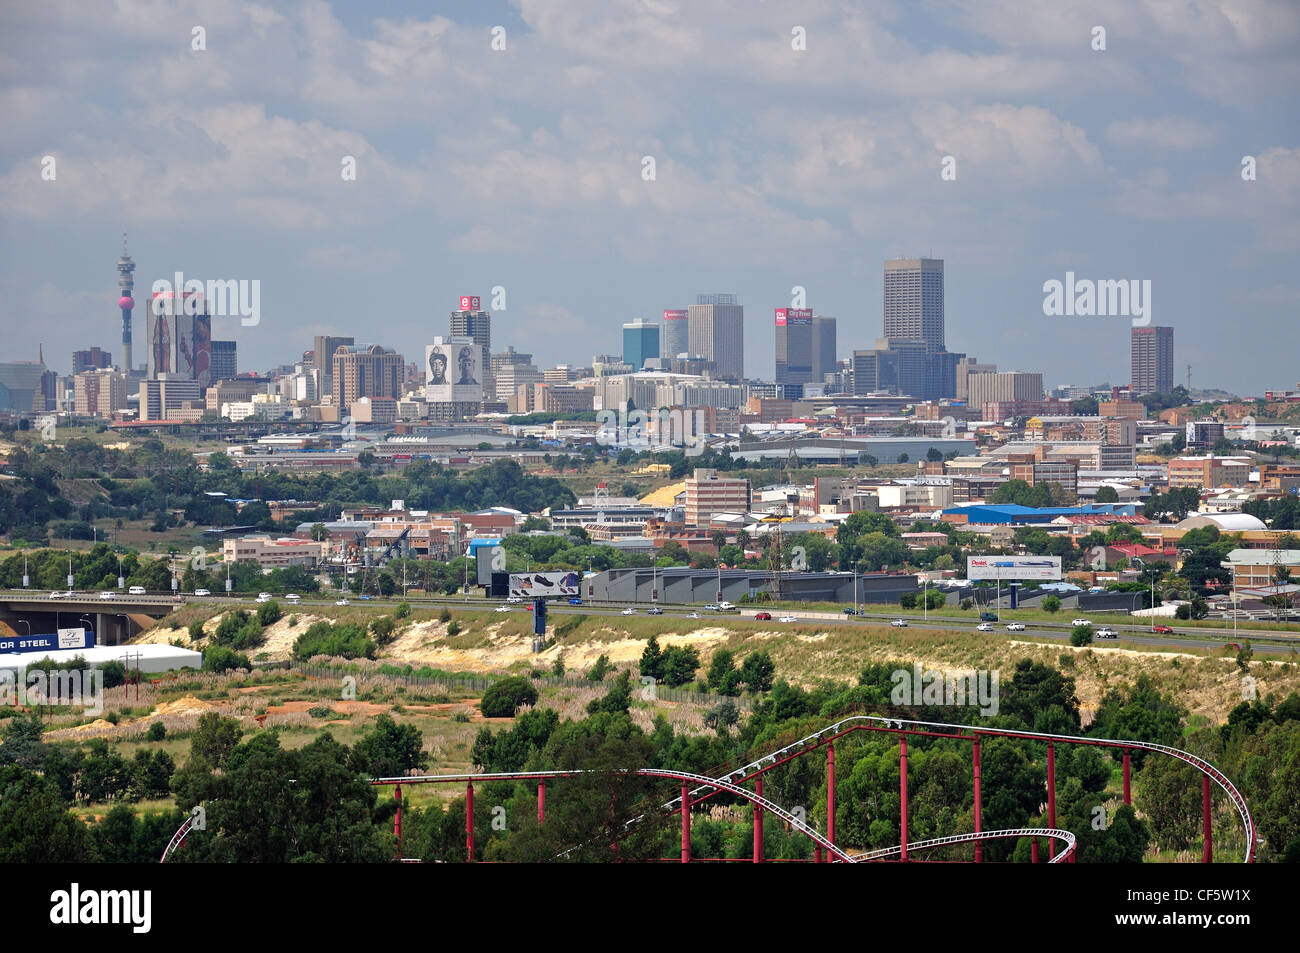 View of city from Giant Wheel at Gold Reef City Theme Park, Johannesburg, Gauteng Province, South Africa Stock Photo